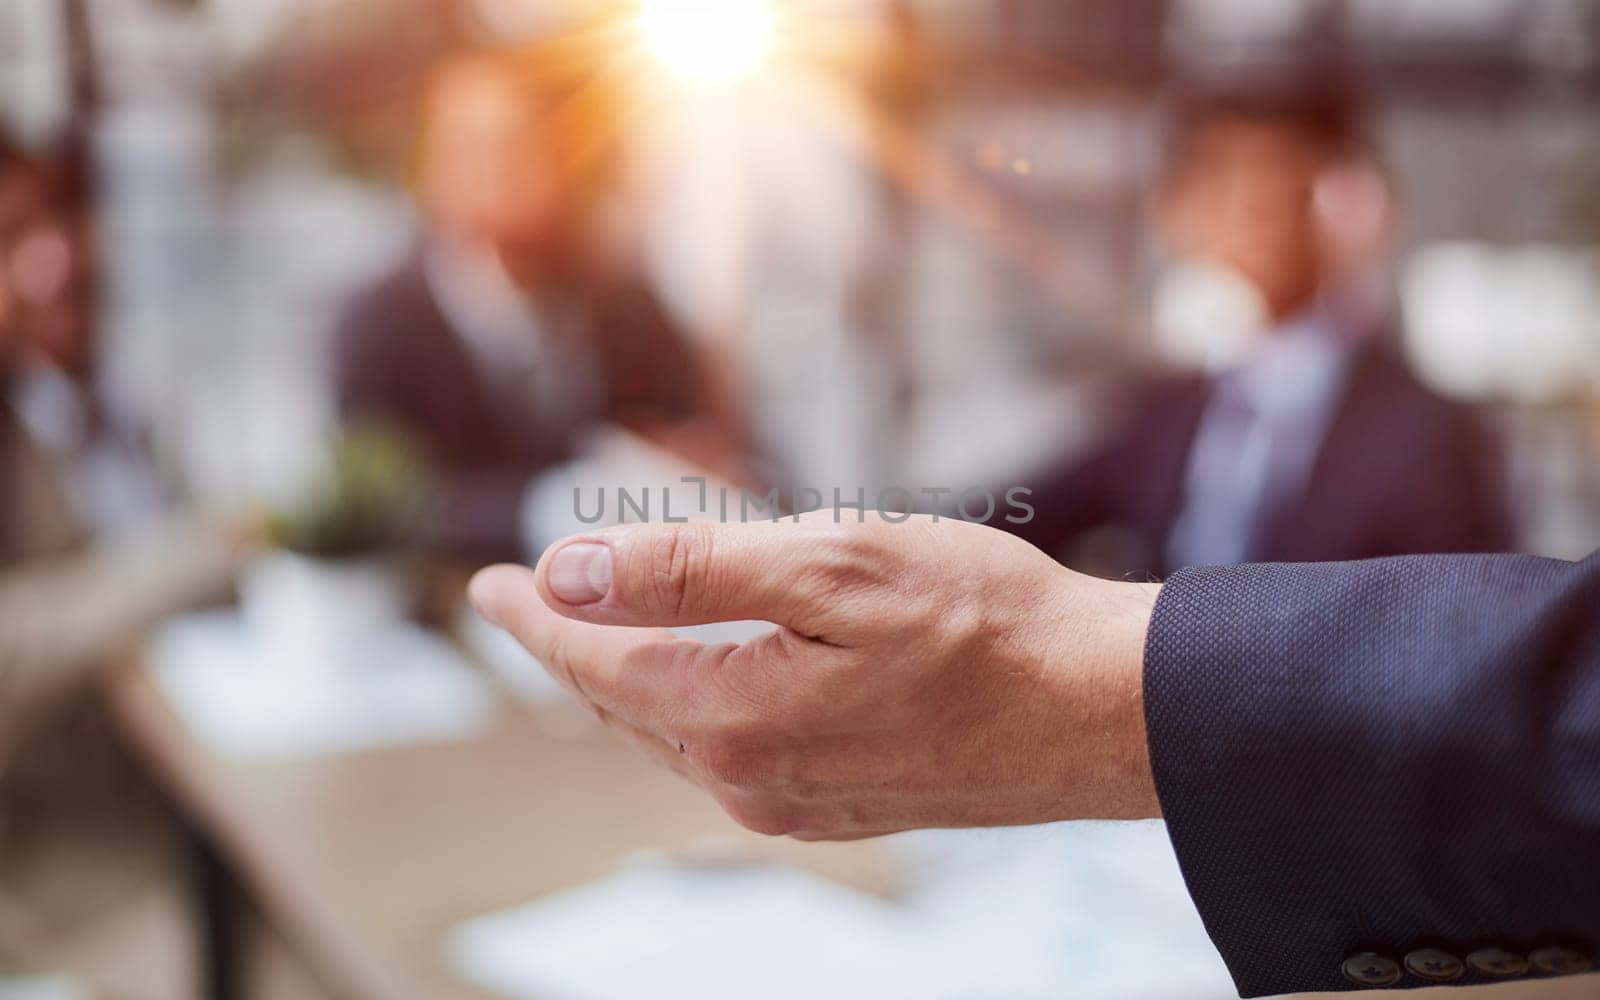 The hand of a man in a suit stretches to the side against the background of blurred colleagues. by Prosto